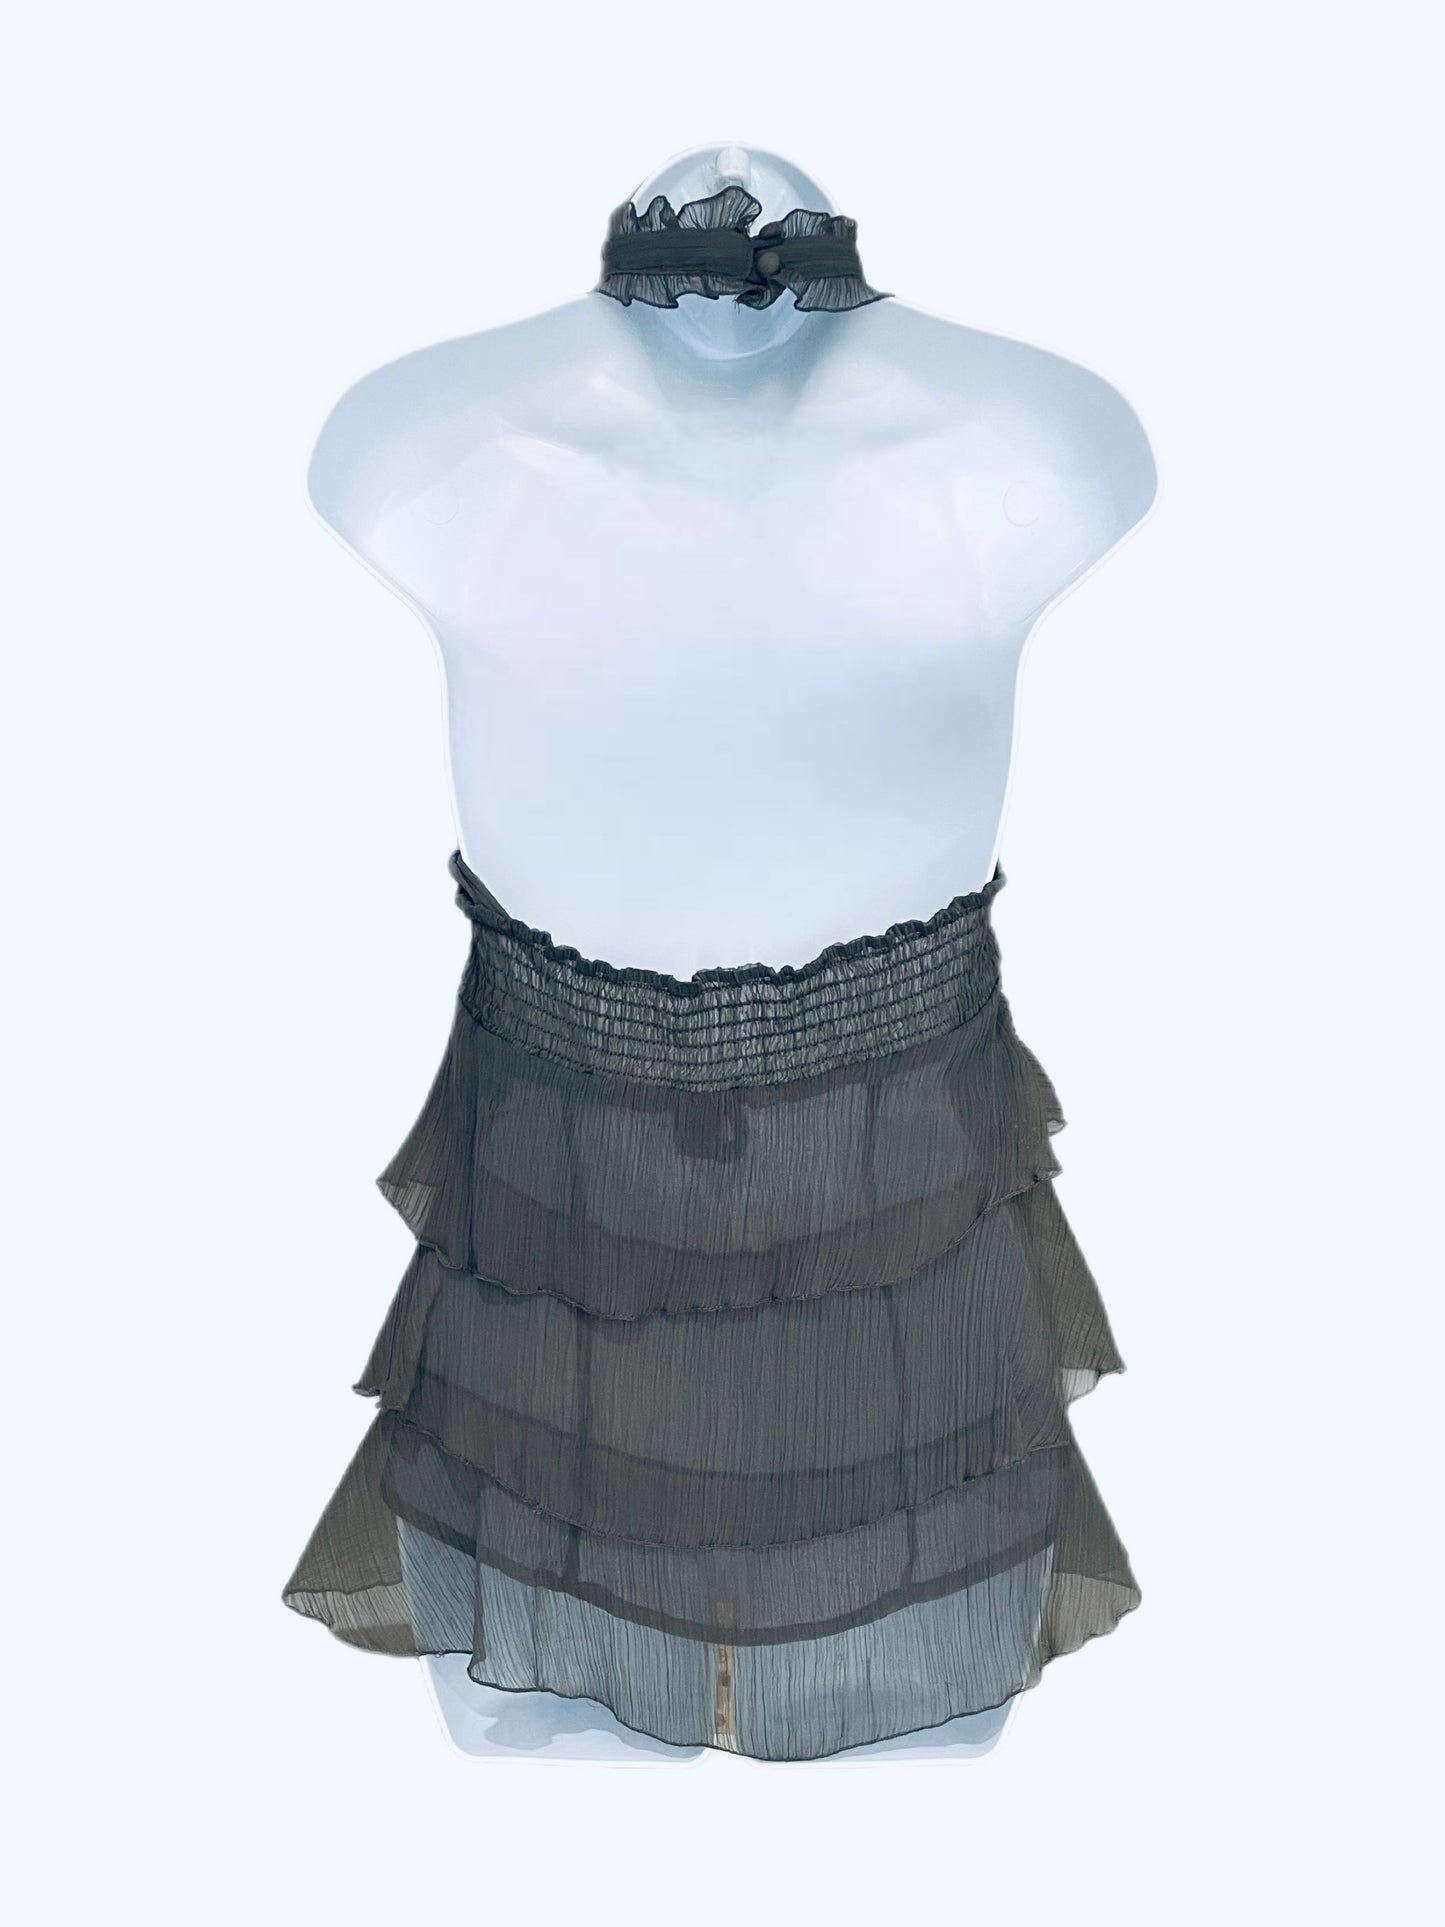 Shirt-Halter Top Design-Gray Color- Polyester Material- Ruffled Design-By Passport